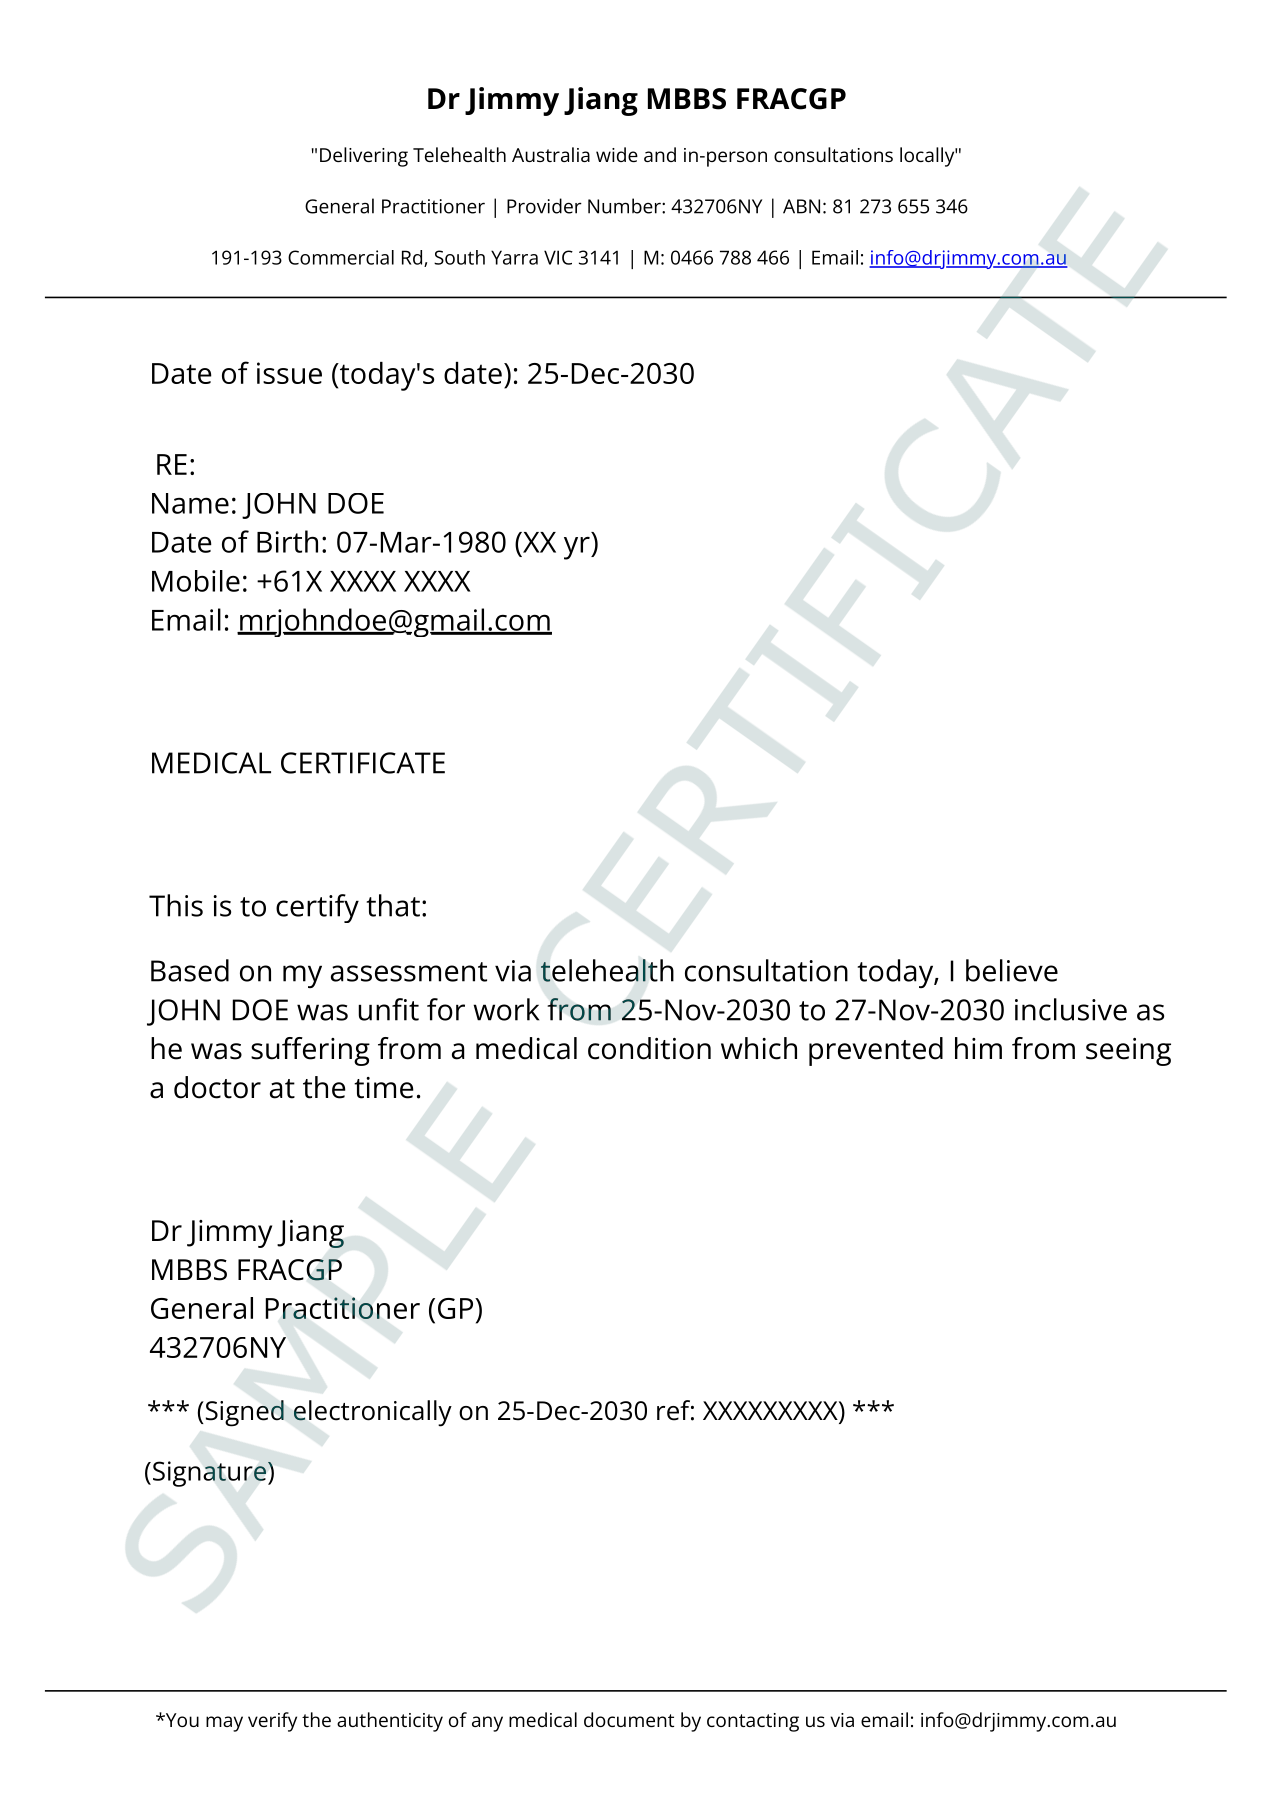 A sample of a Backdated Medical Certificate issued by Dr Jimmy